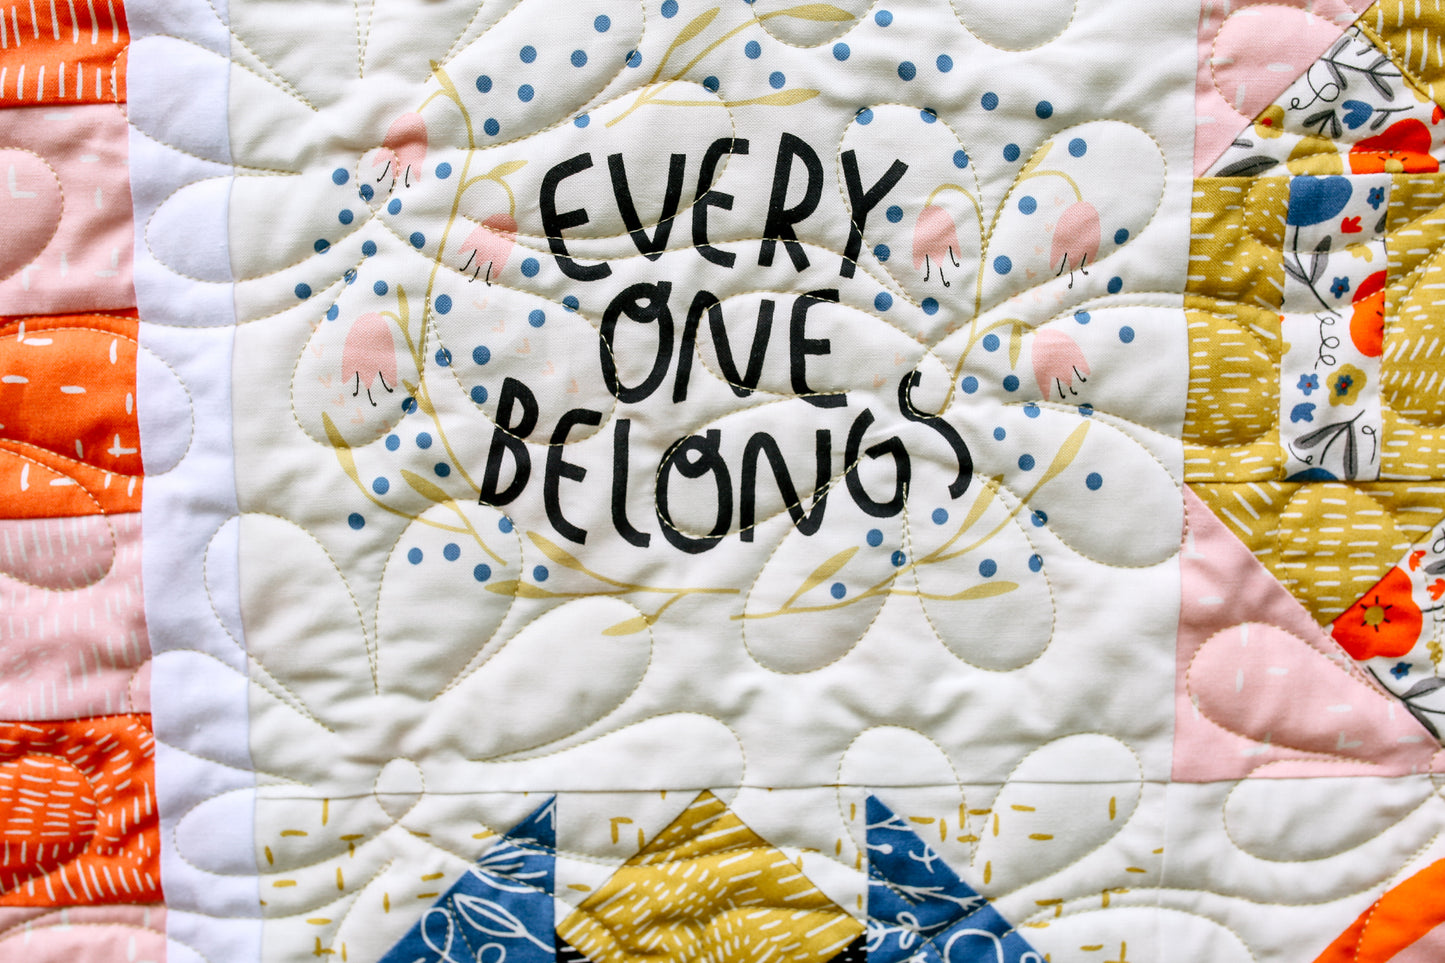 Words To Live By Quilt